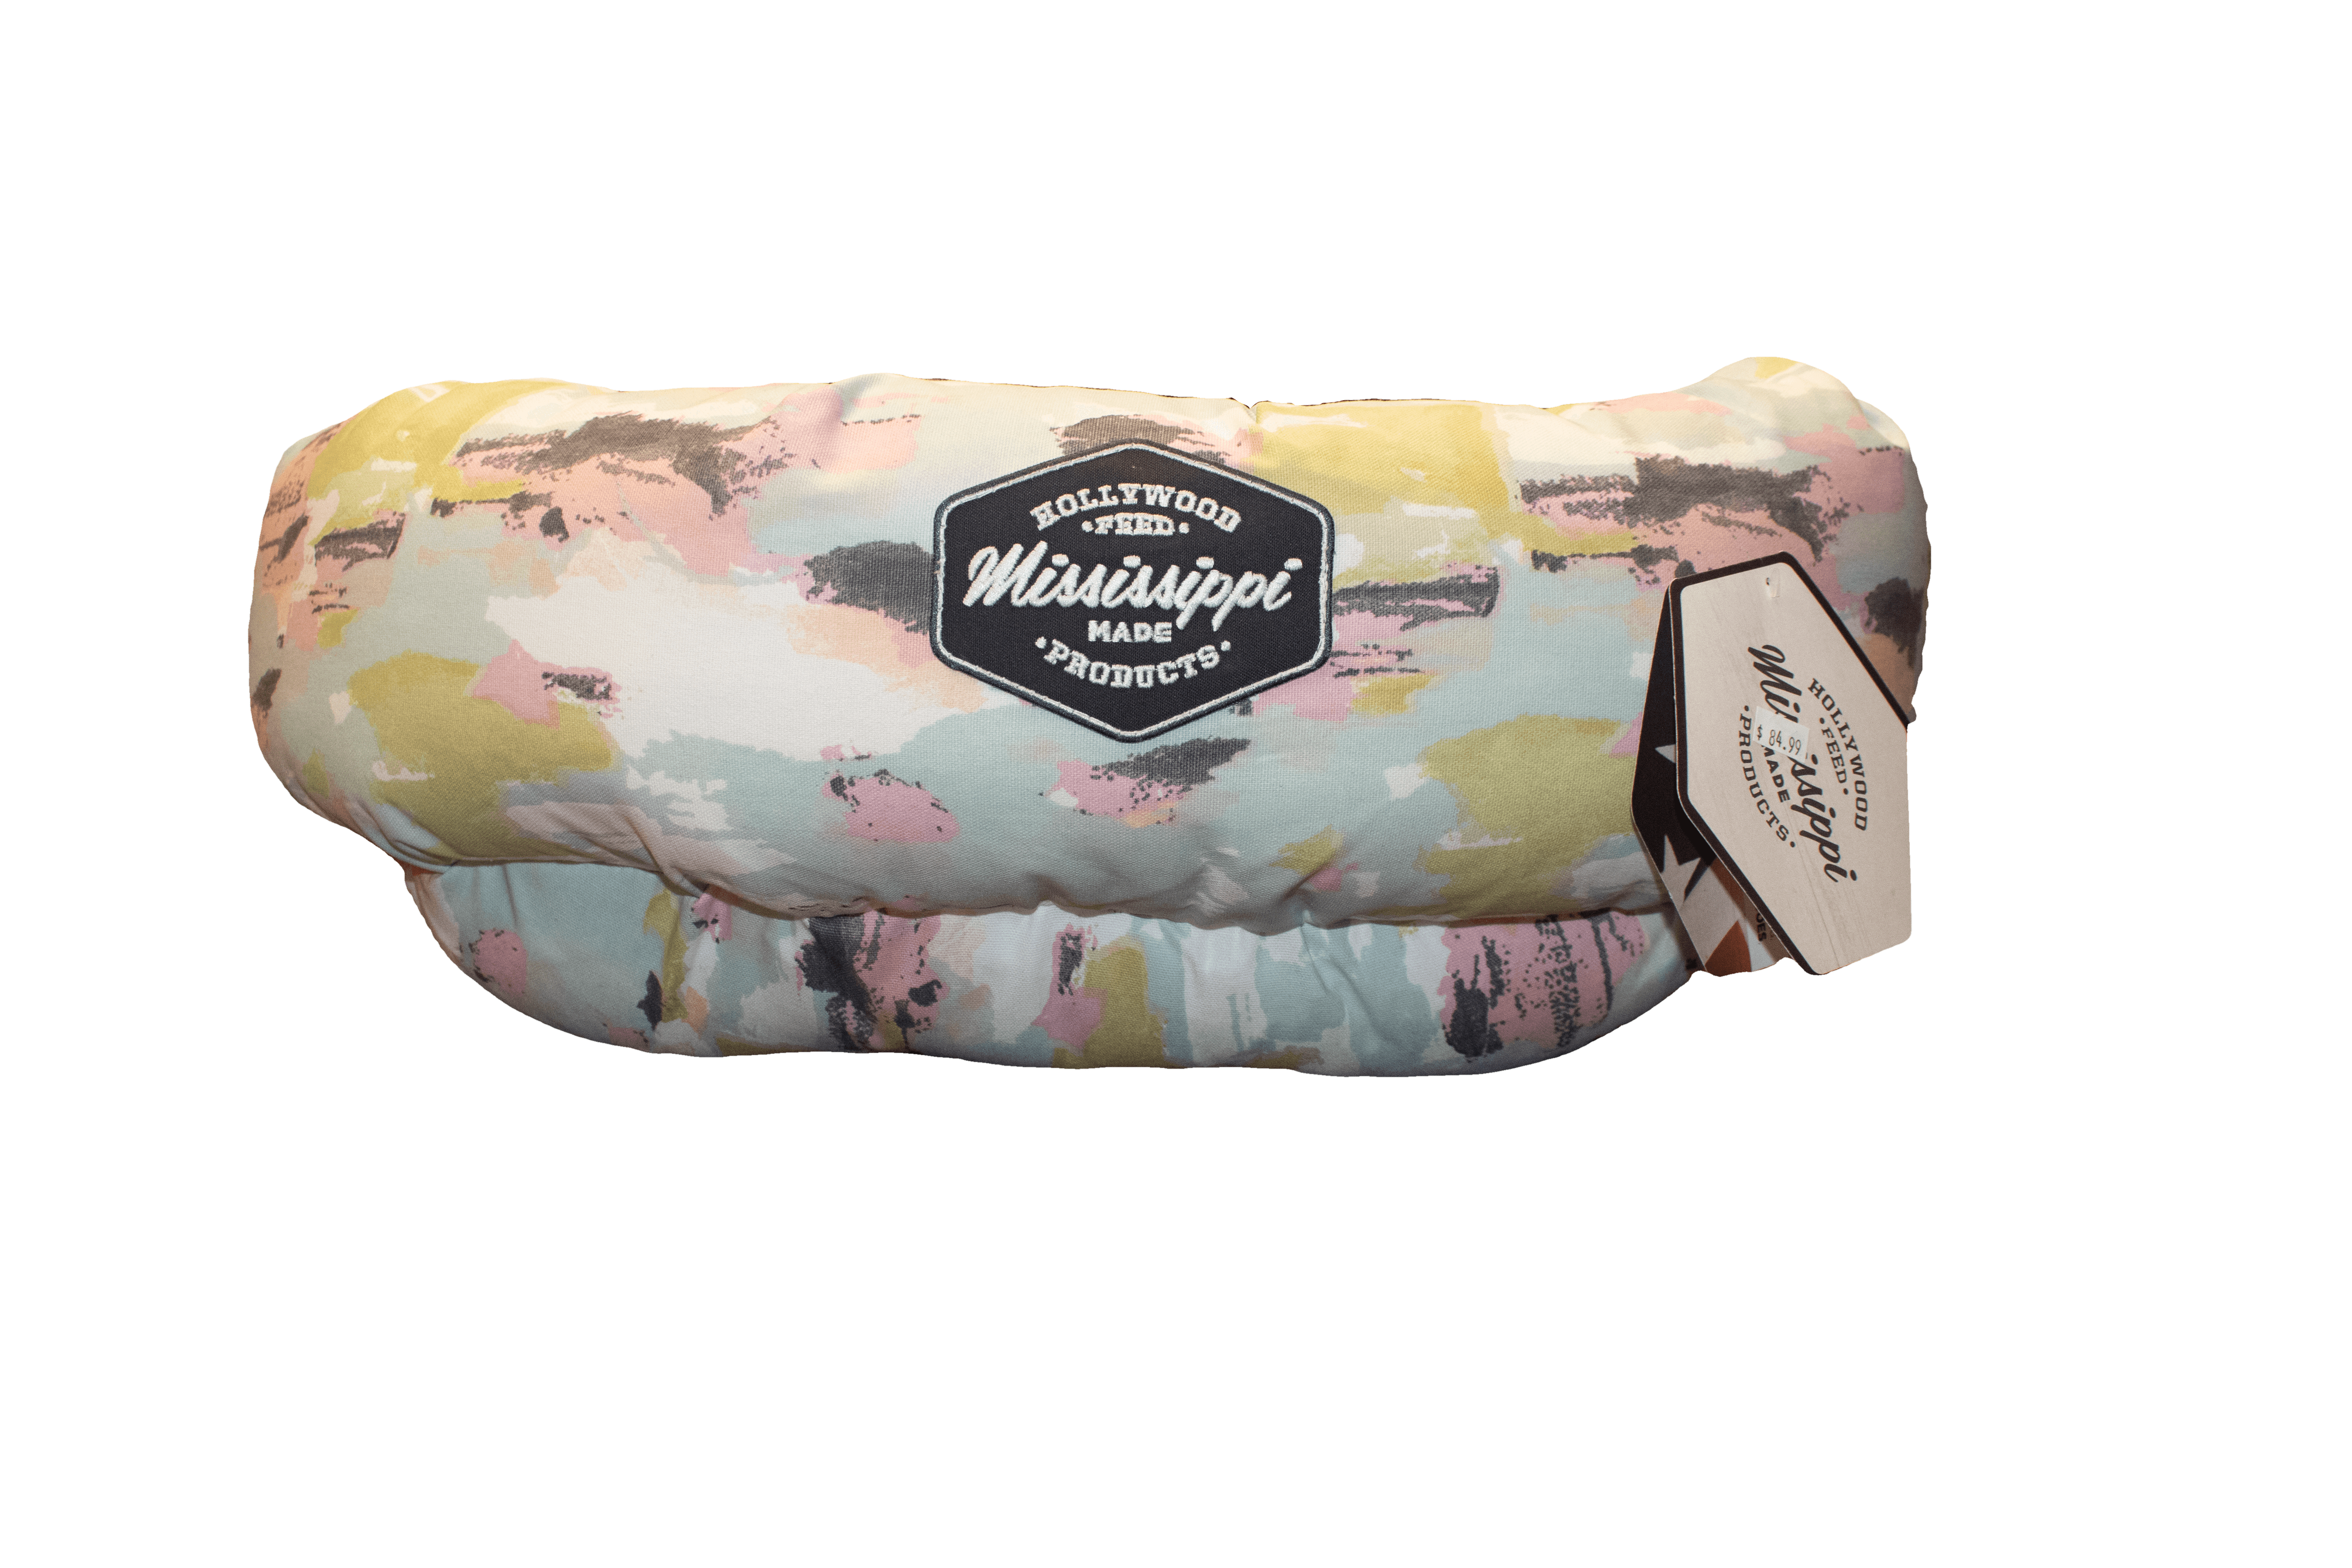 Hollywood feed mississippi made donut dog bed - limited edition cotton